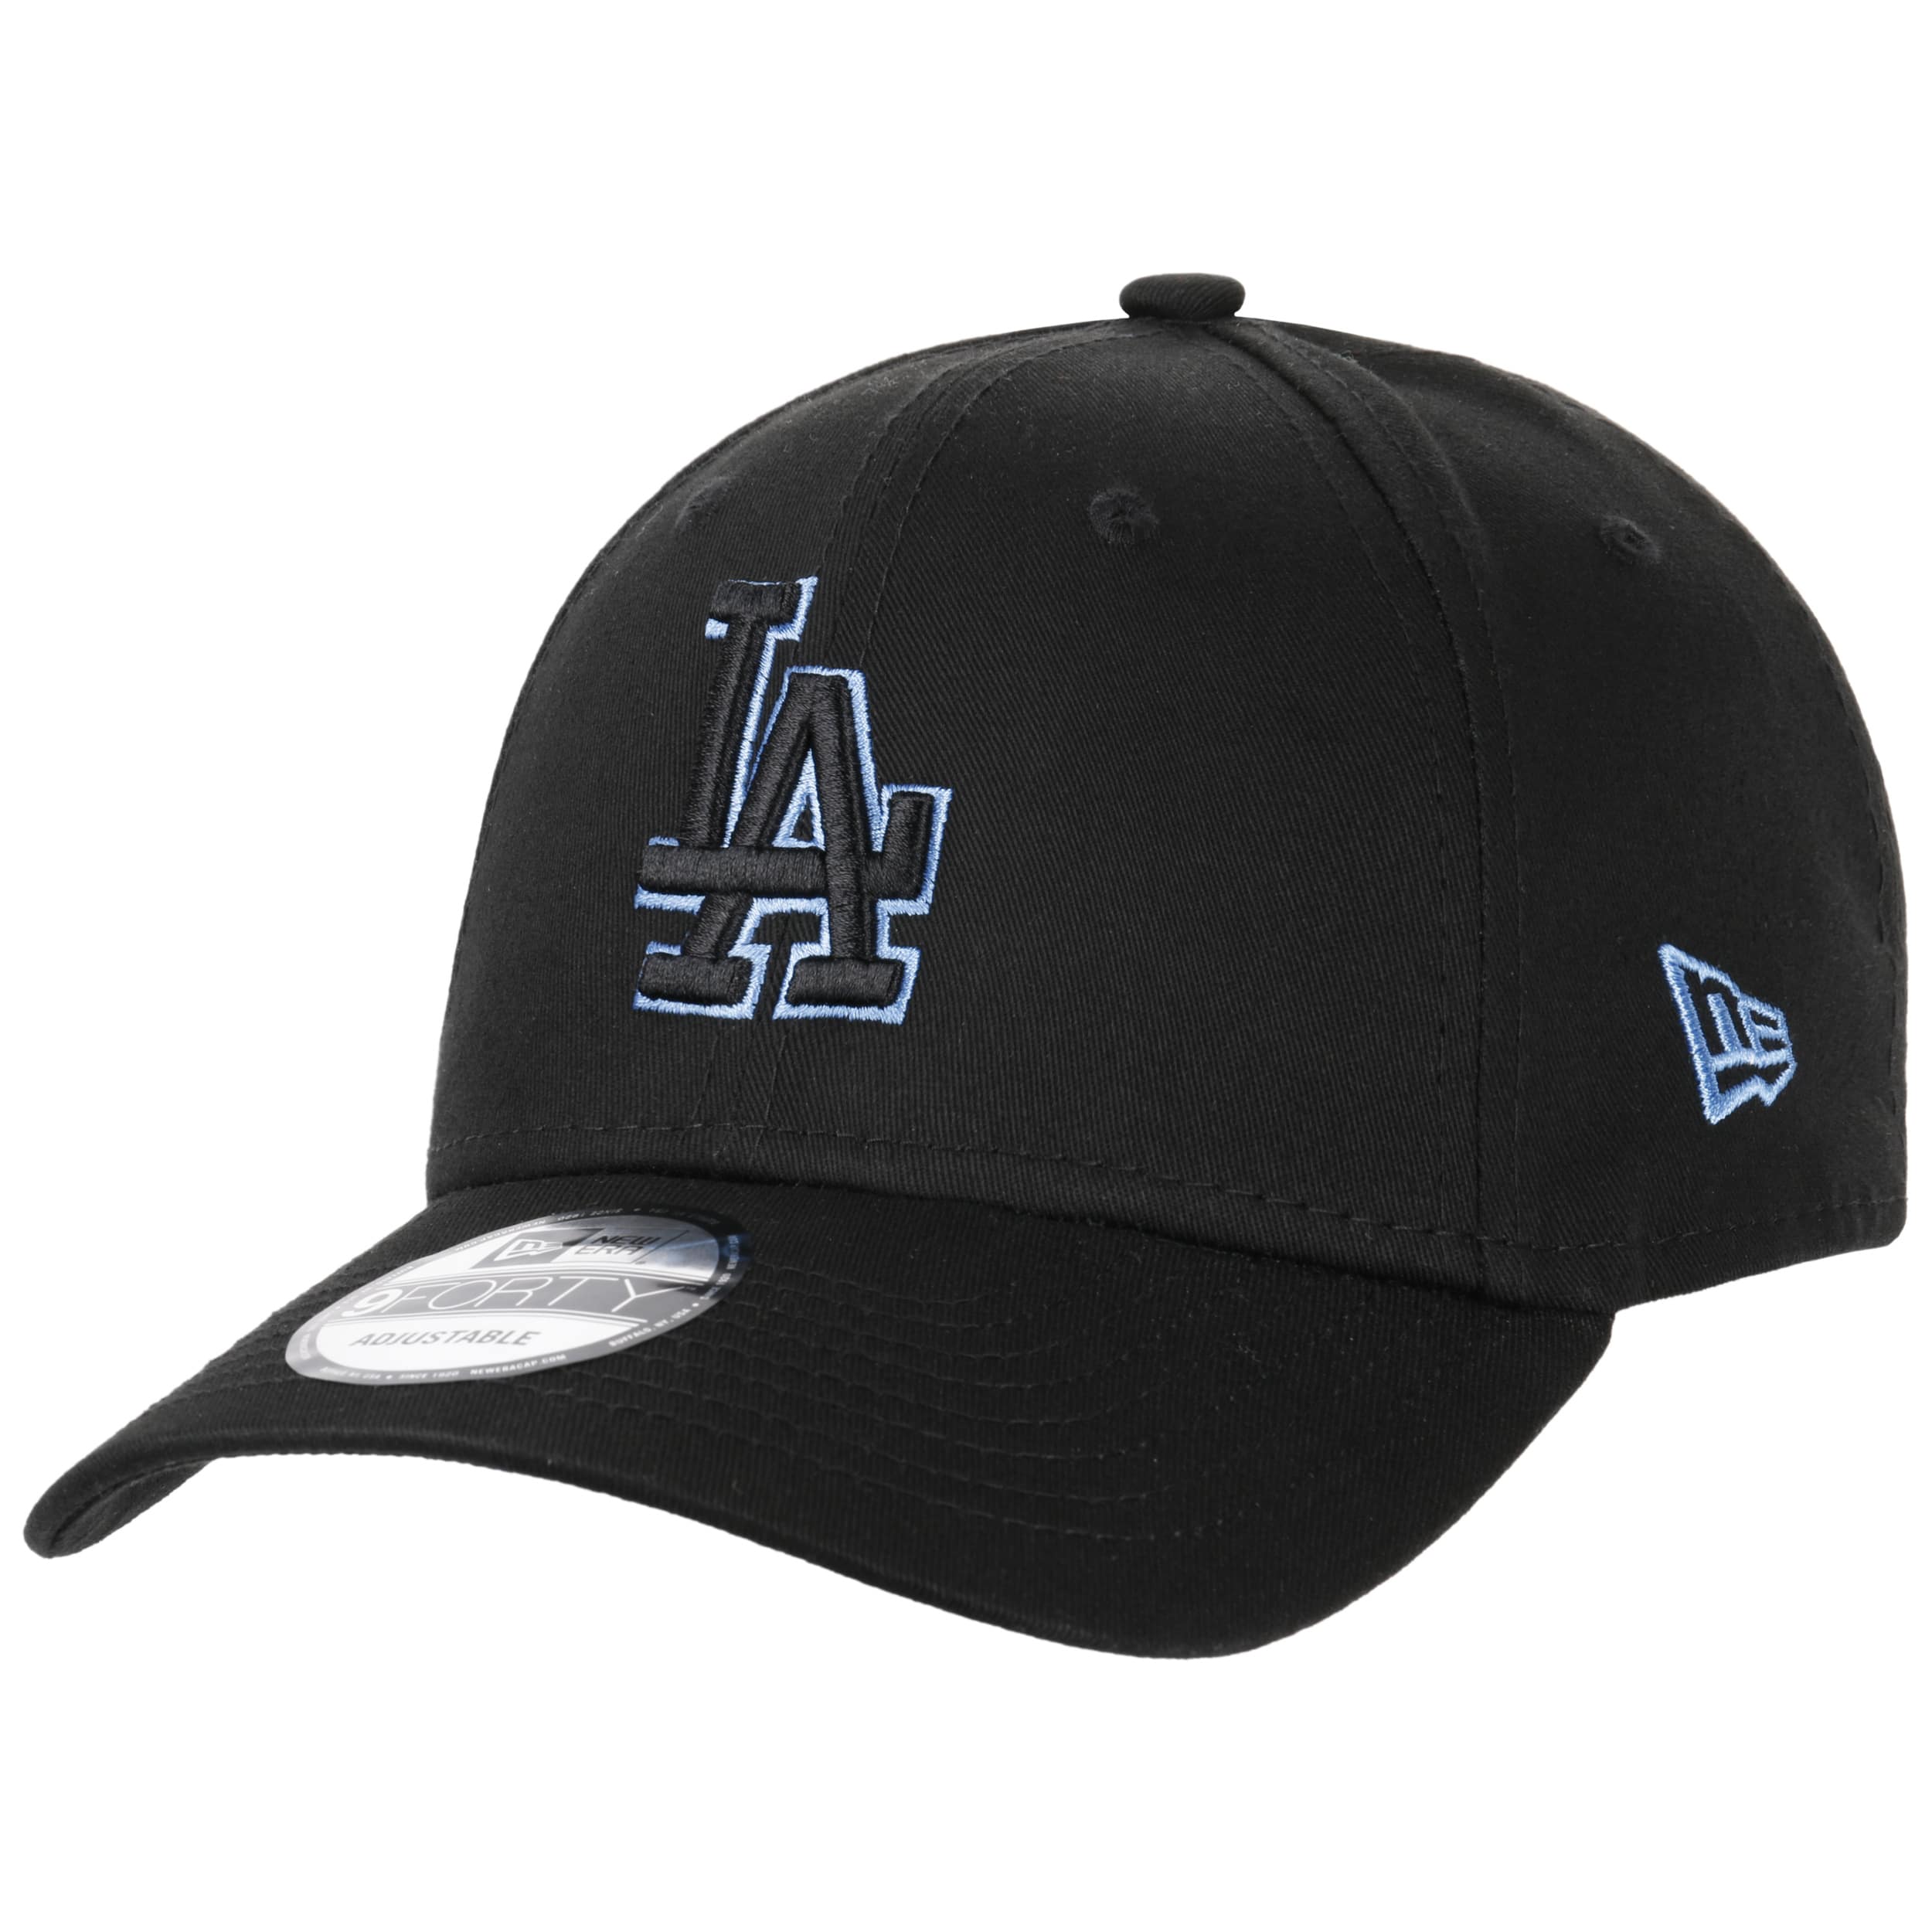 NEW ERA - Accessories - Youth LA Dodgers On Field Fitted Hat